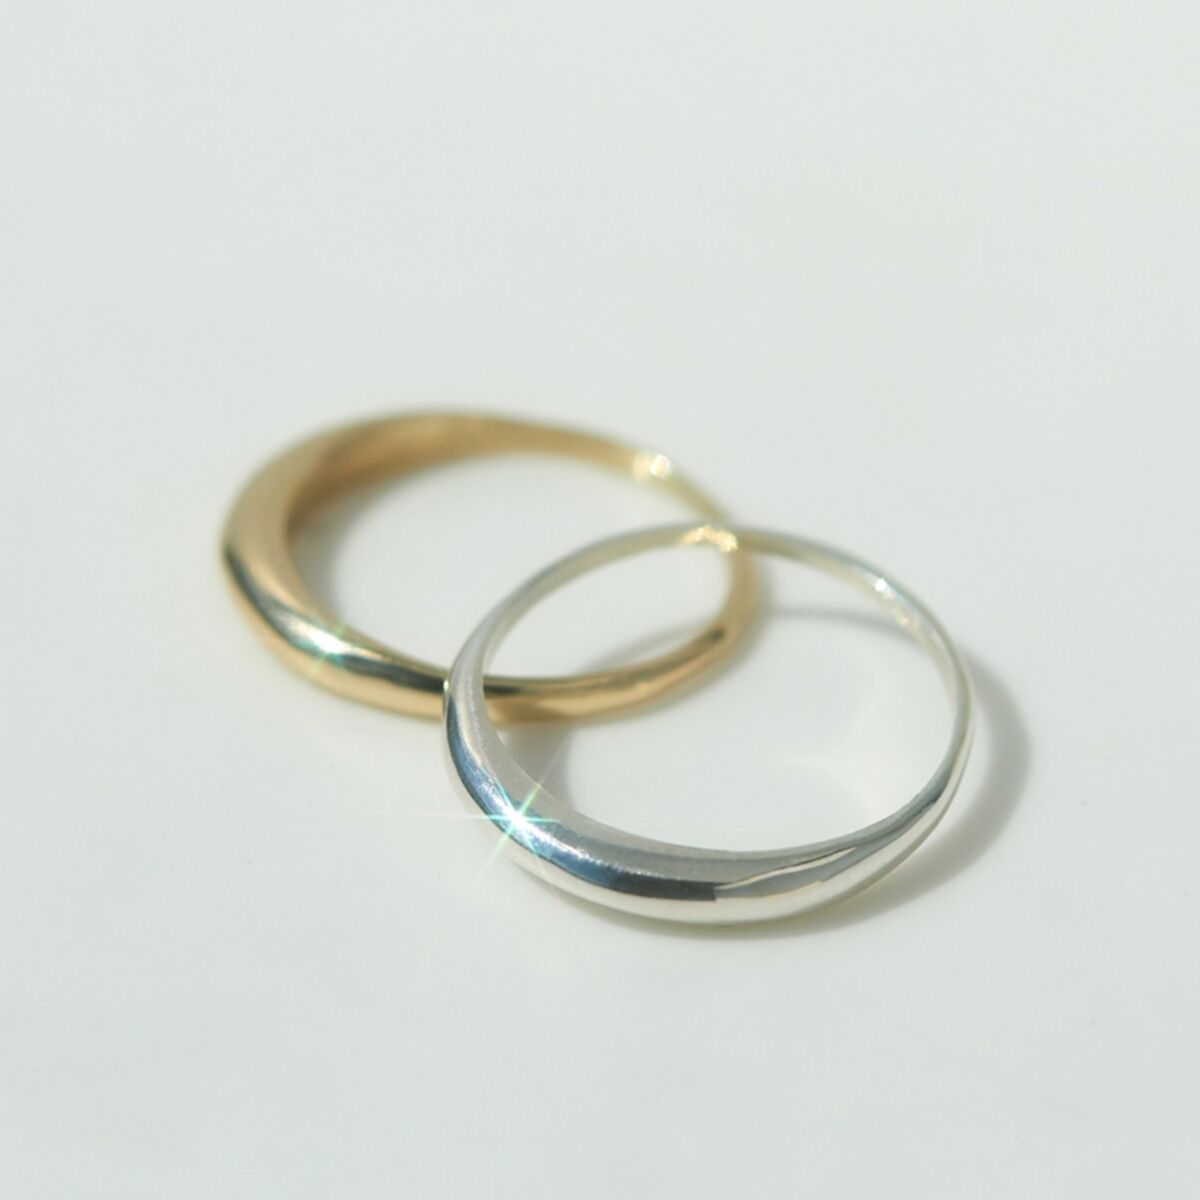 Product Image for Barnes Ring, Sterling Silver